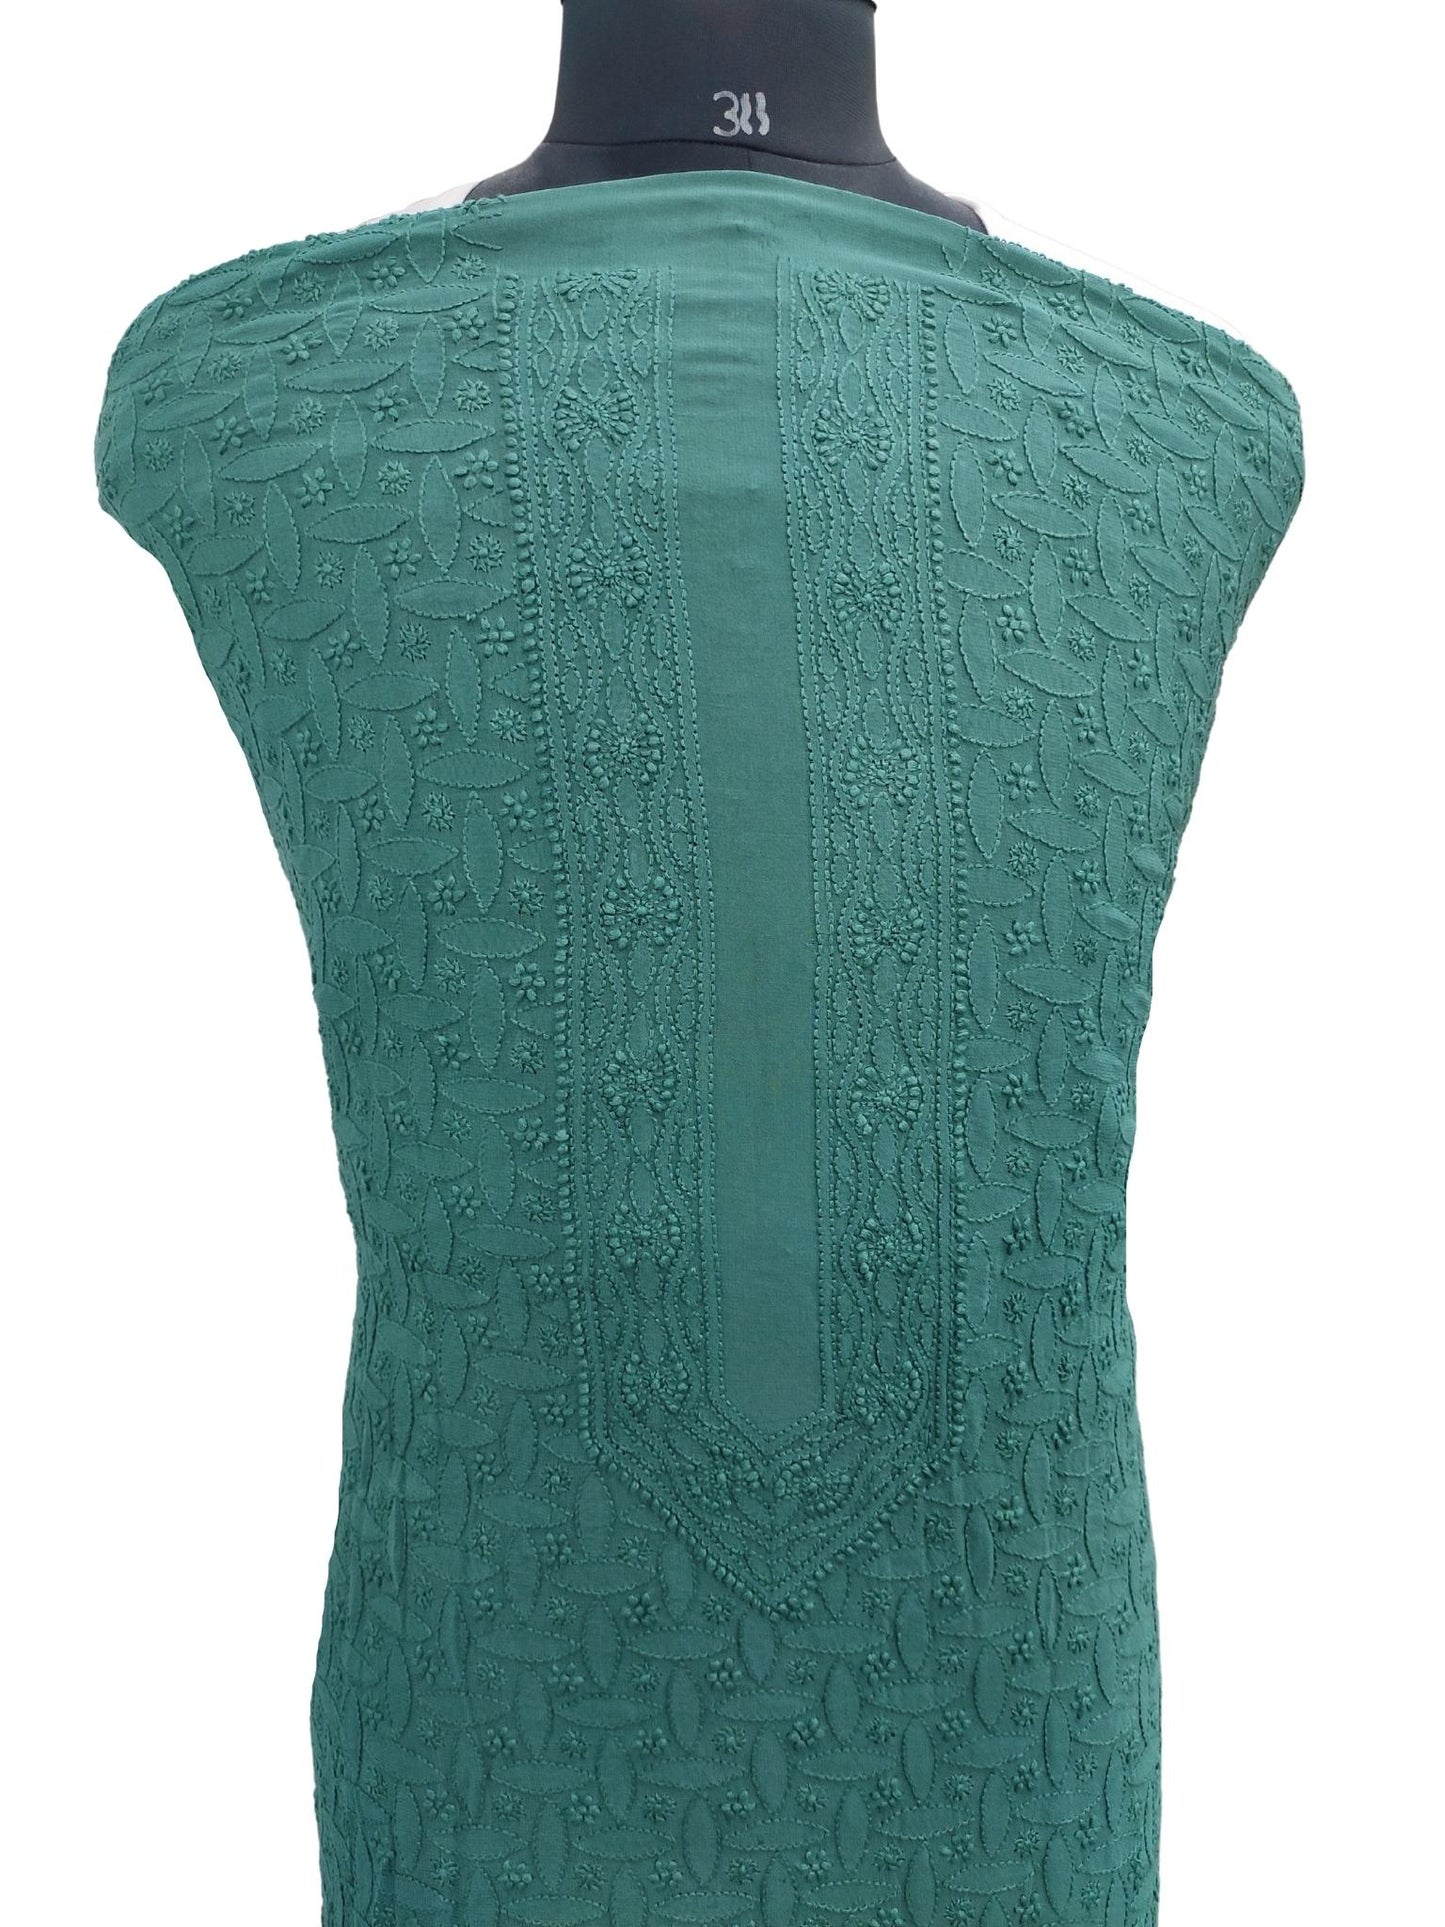 Shyamal Chikan Hand Embroidered Teal Viscose Georgette Lucknowi All-Over Chikankari Unstitched Men's Kurta Piece – S16723